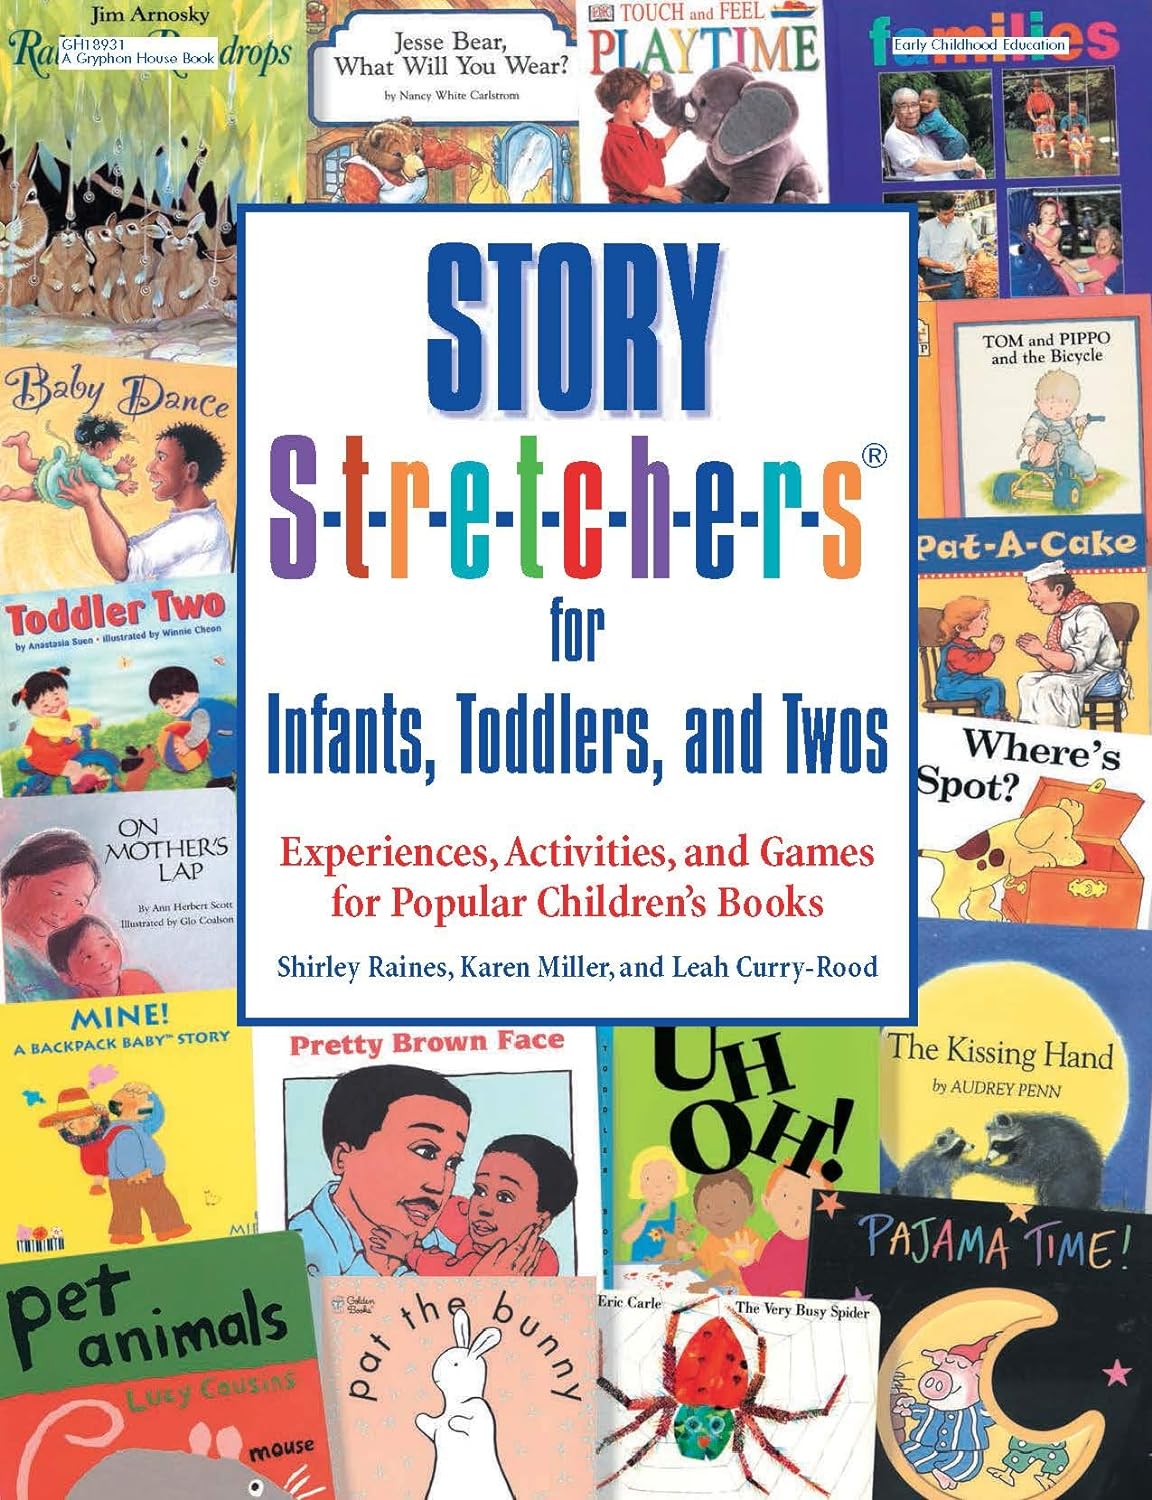 Story S-t-r-e-t-c-h-e-r-s® for Infants, Toddlers, and Twos: Experiences, Activities, and Games for Popular Childrens Books